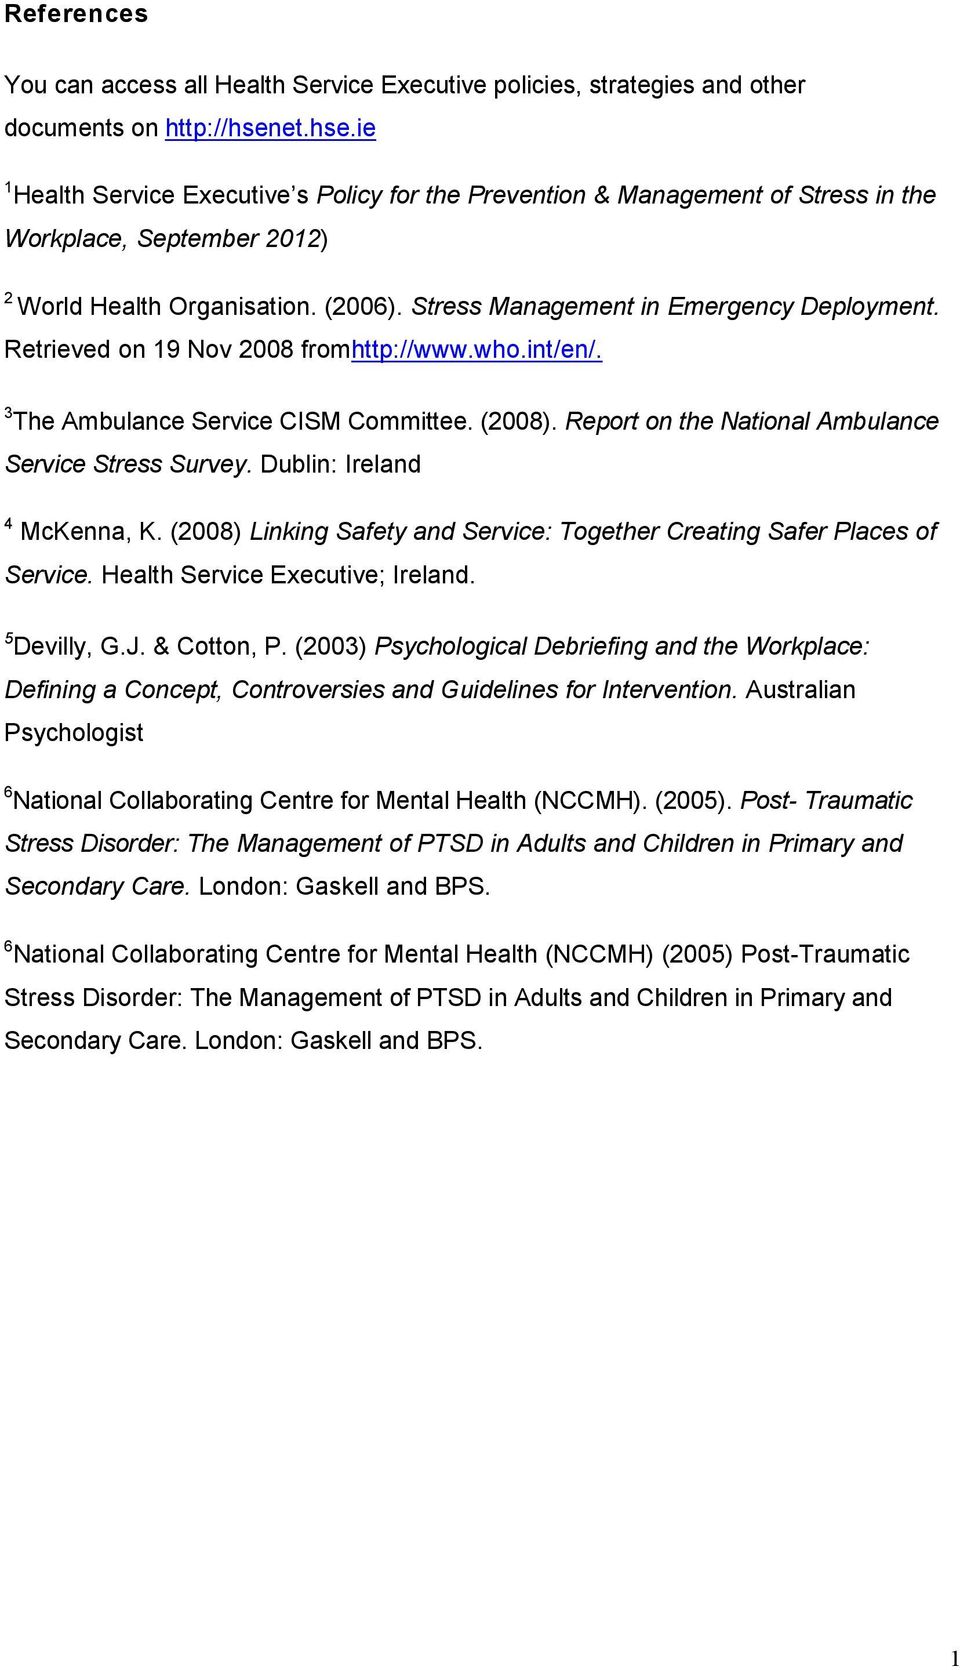 Stress Management in Emergency Deployment. Retrieved on 19 Nov 2008 fromhttp://www.who.int/en/. 3 The Ambulance Service CISM Committee. (2008). Report on the National Ambulance Service Stress Survey.